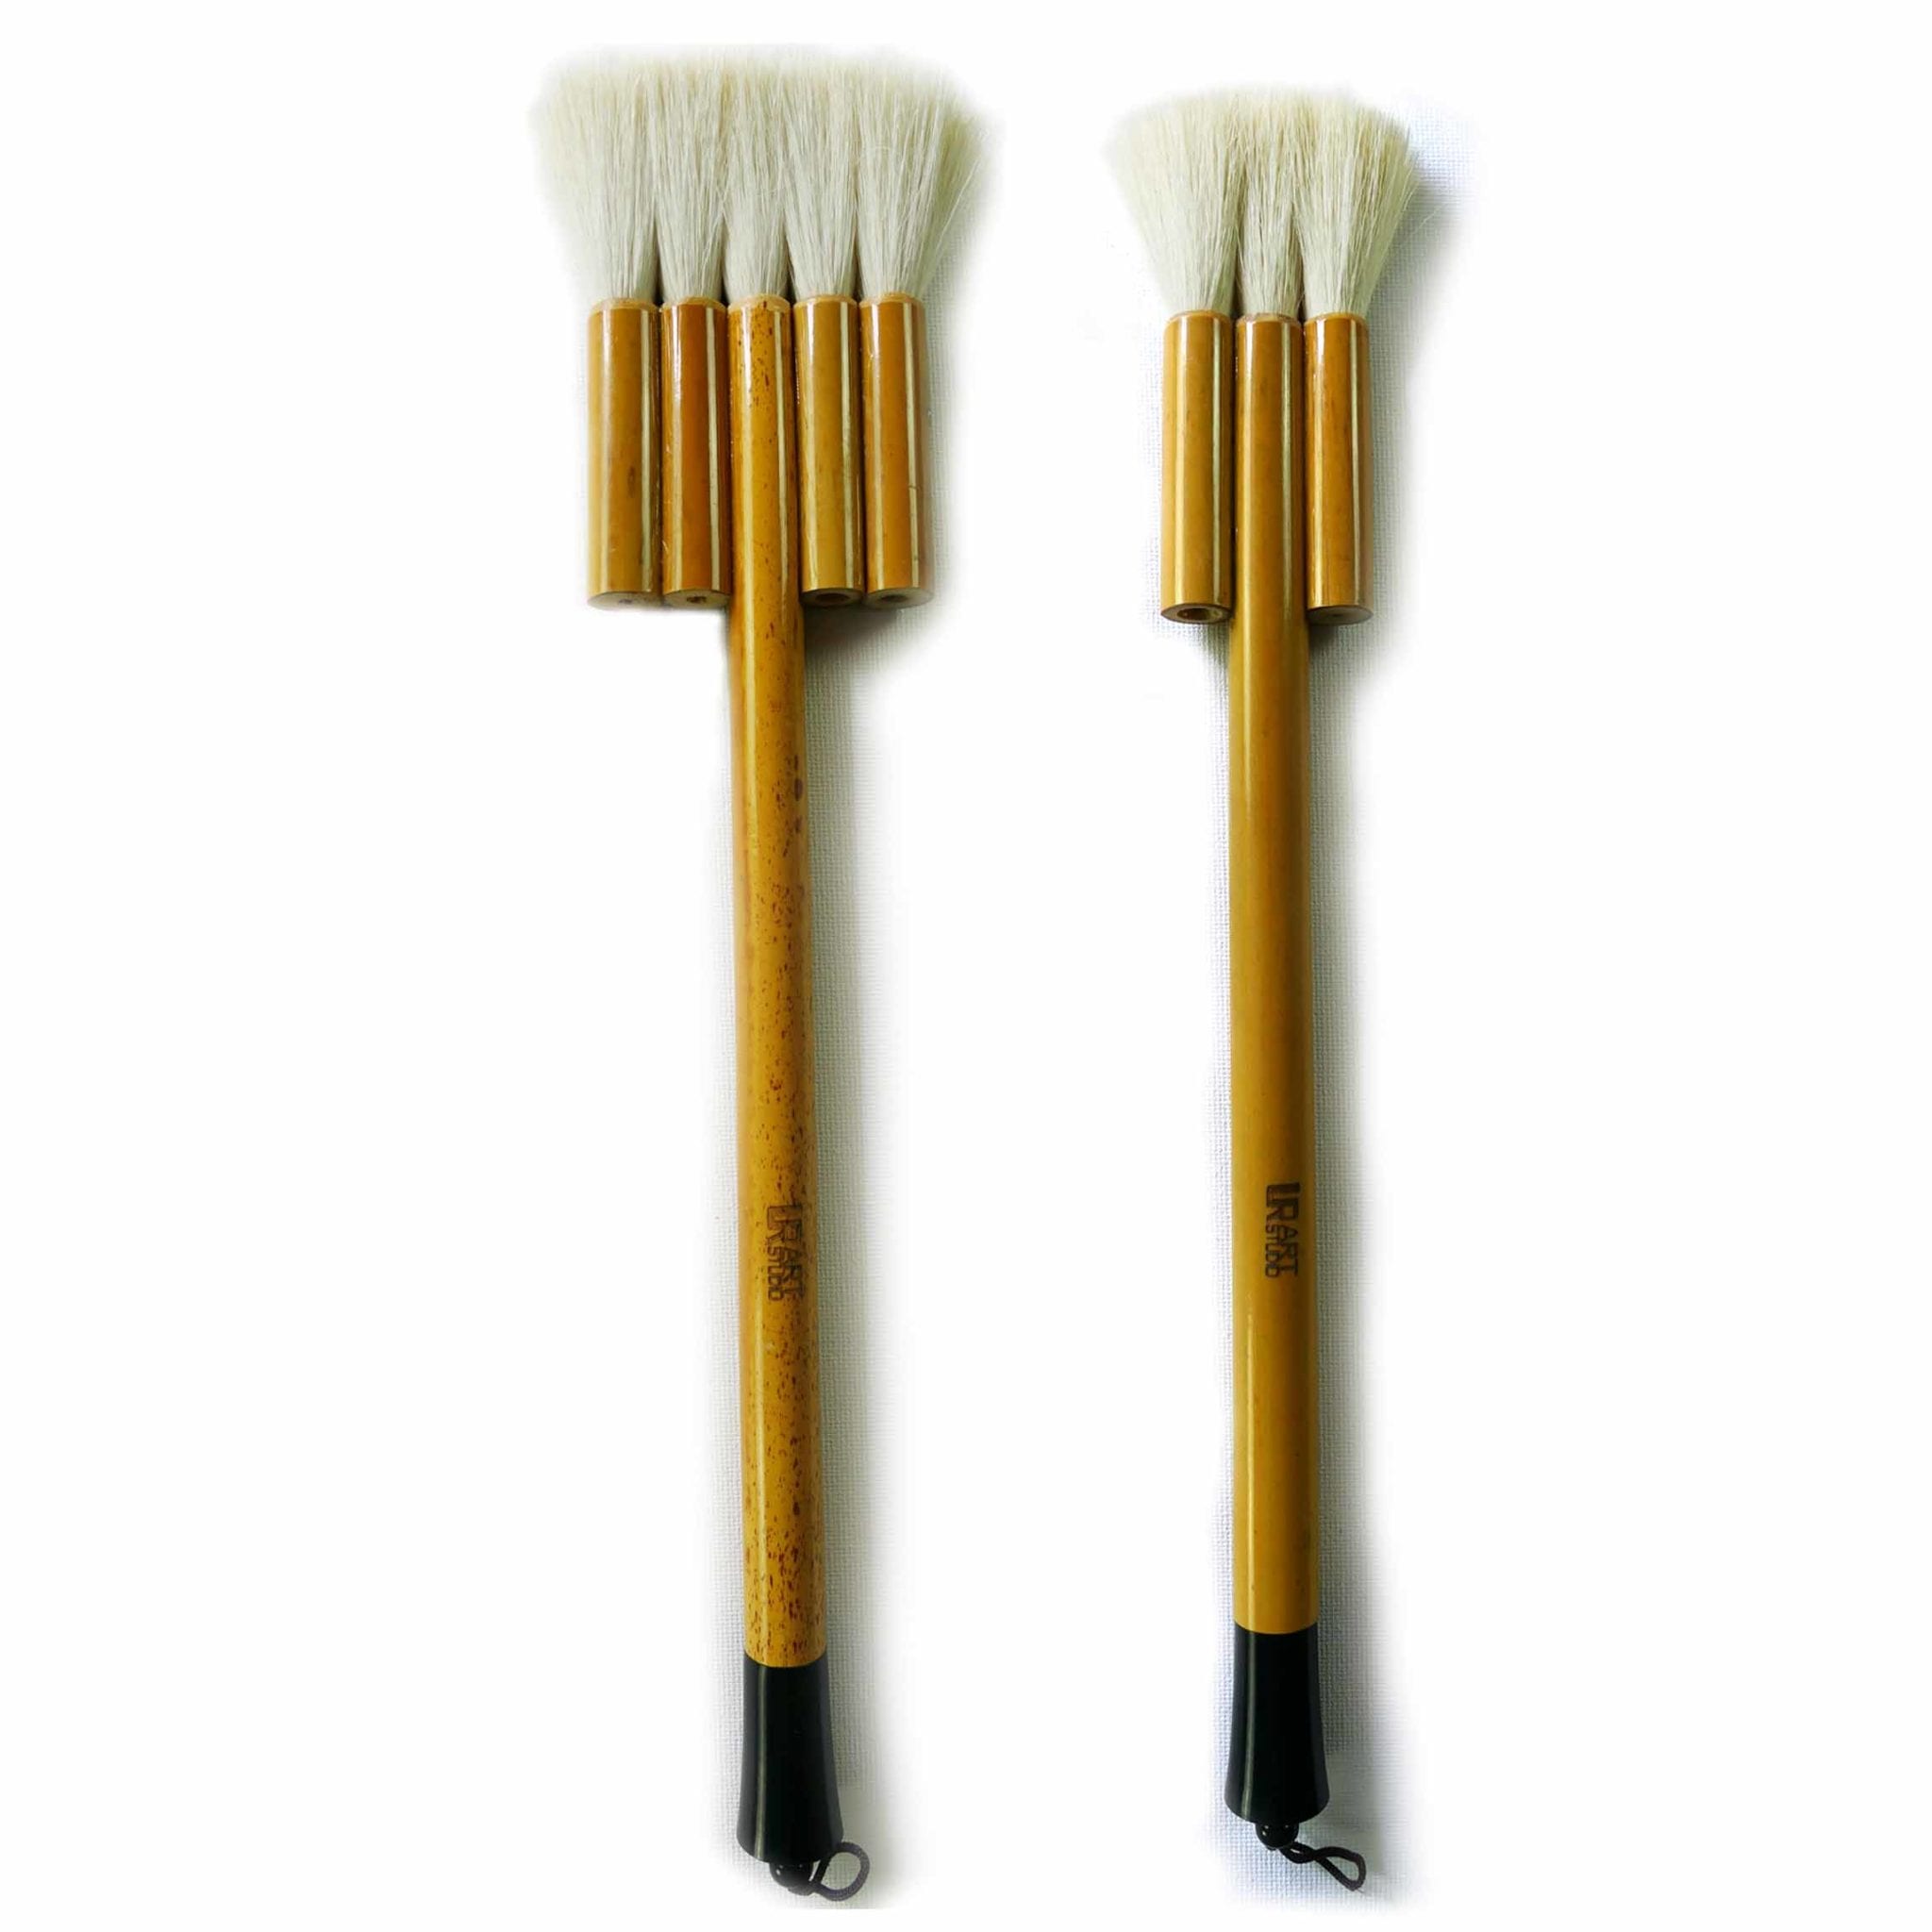 Blending Brush Set by Recollections™